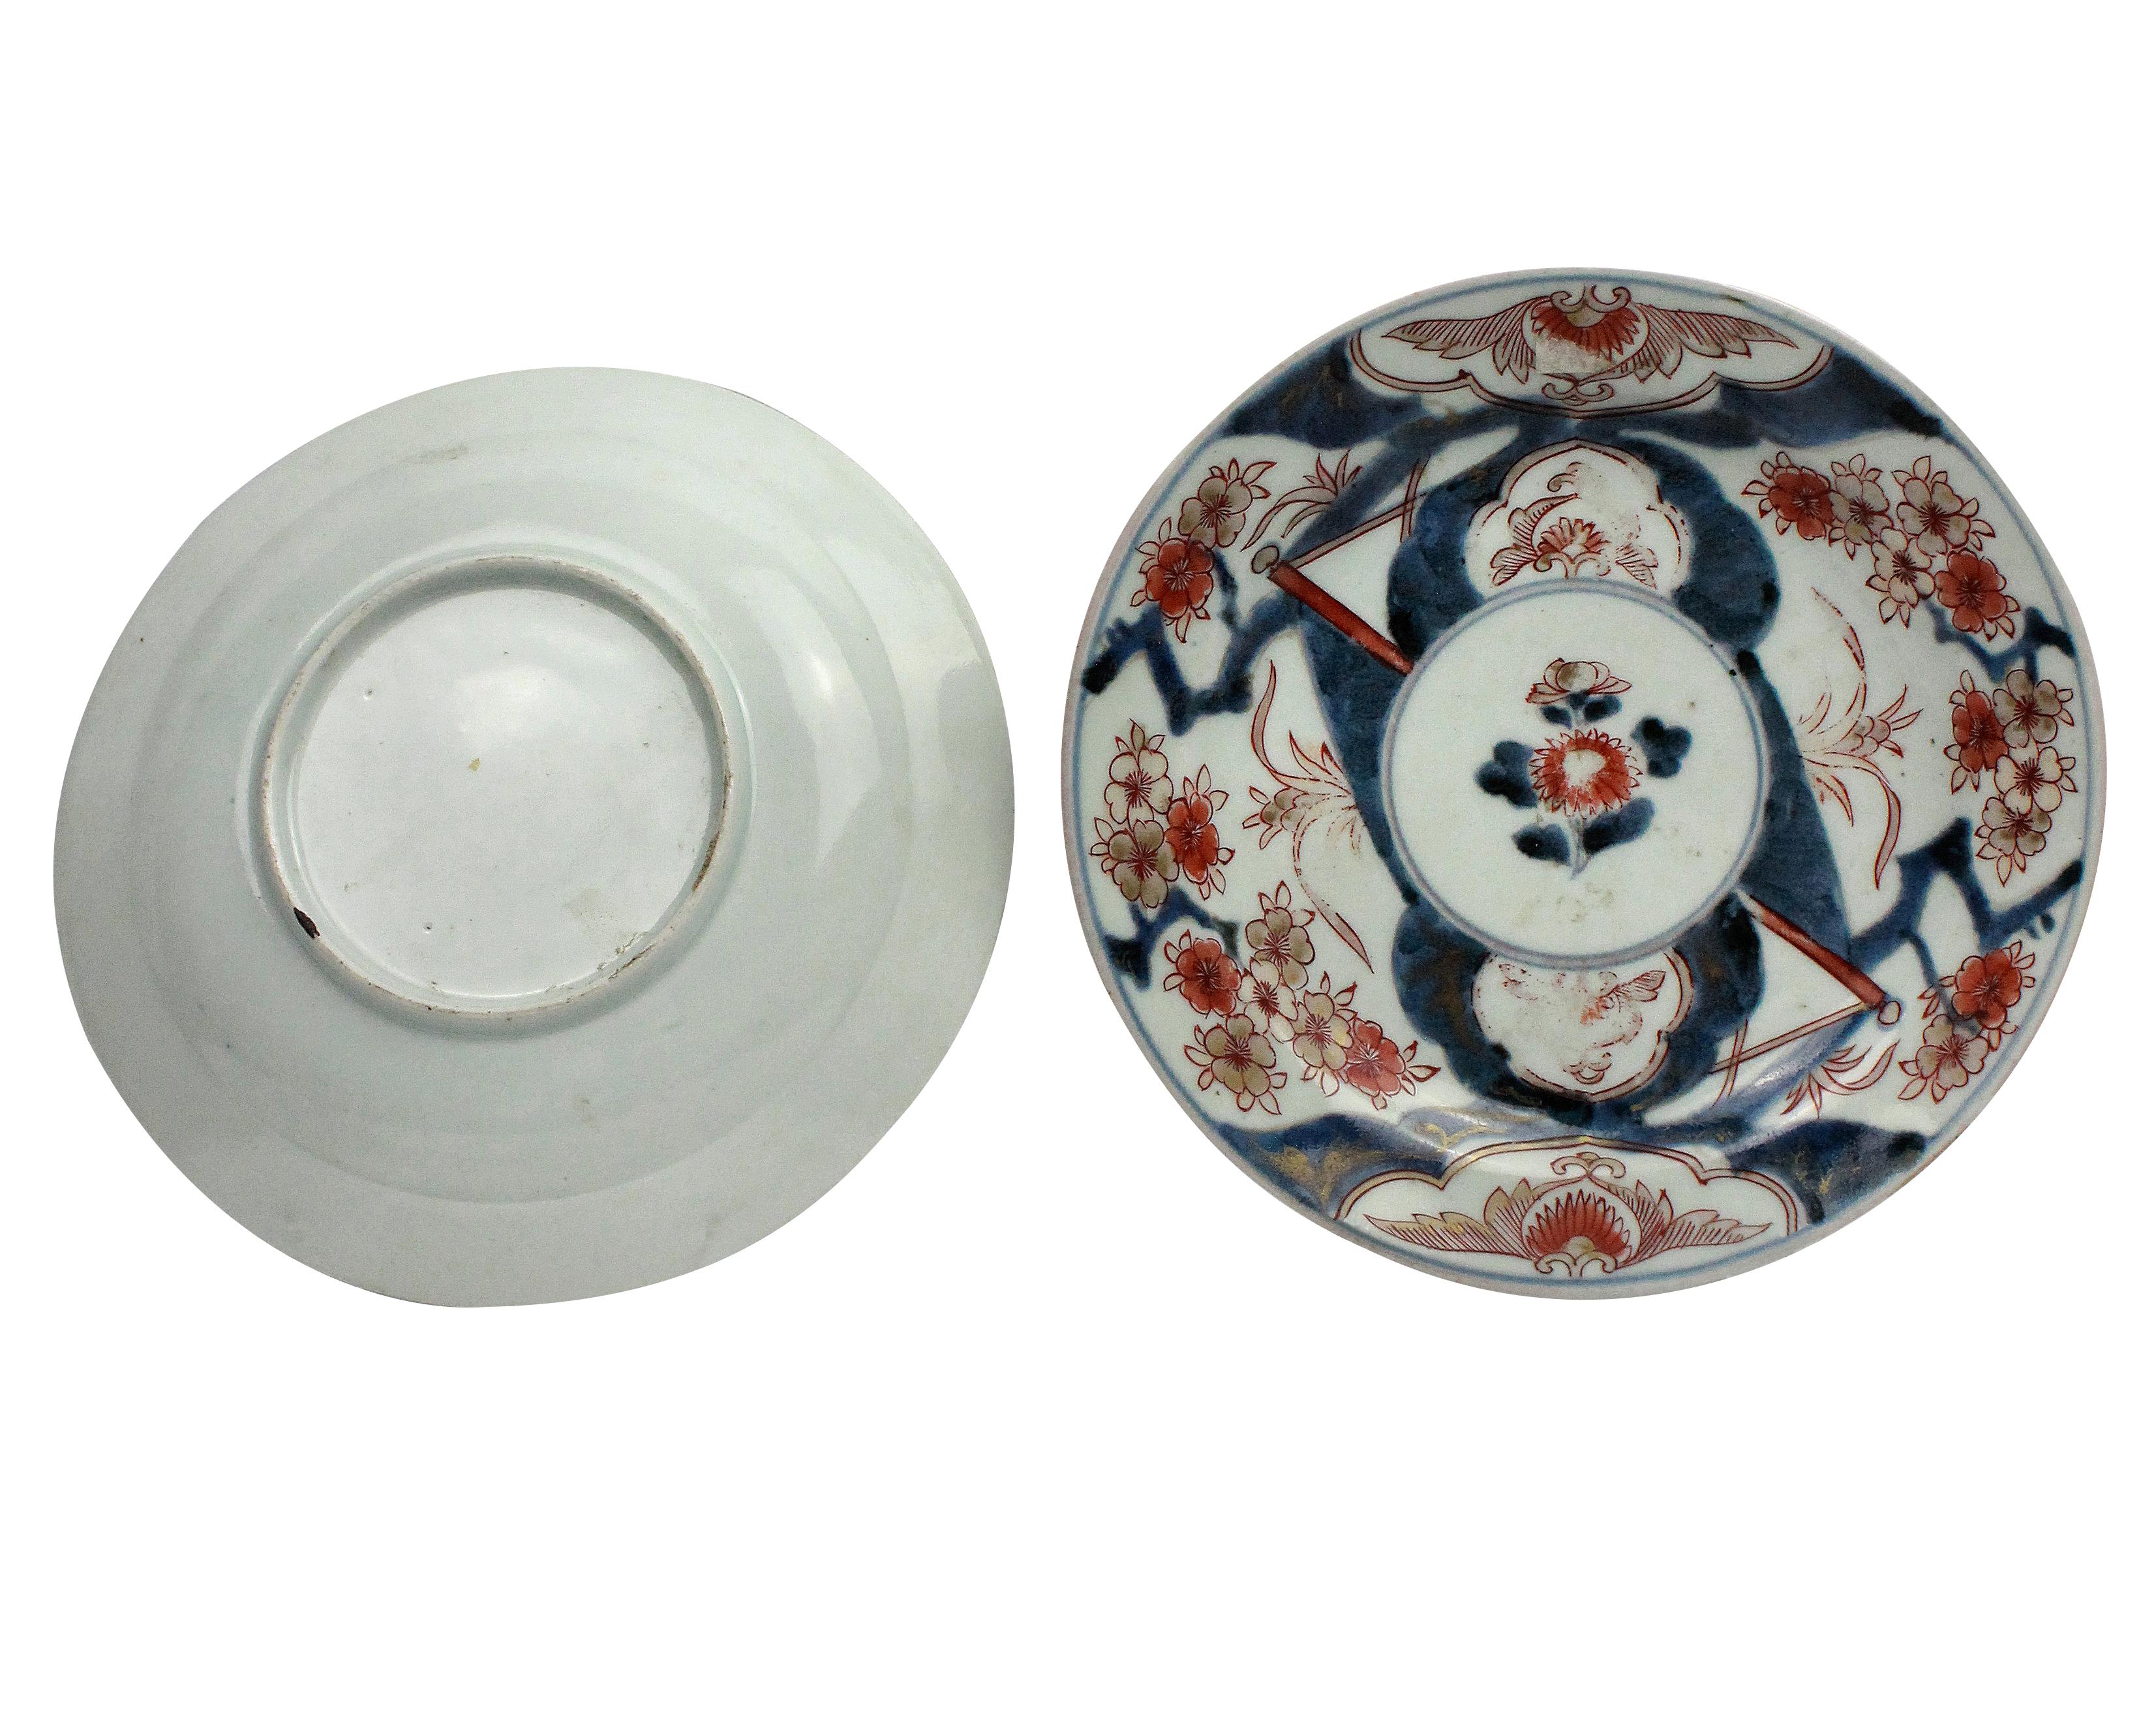 Pair of traditional Japanese Imari Edo period plates. No repairs or chips, just rubbing to the gilding and glaze.